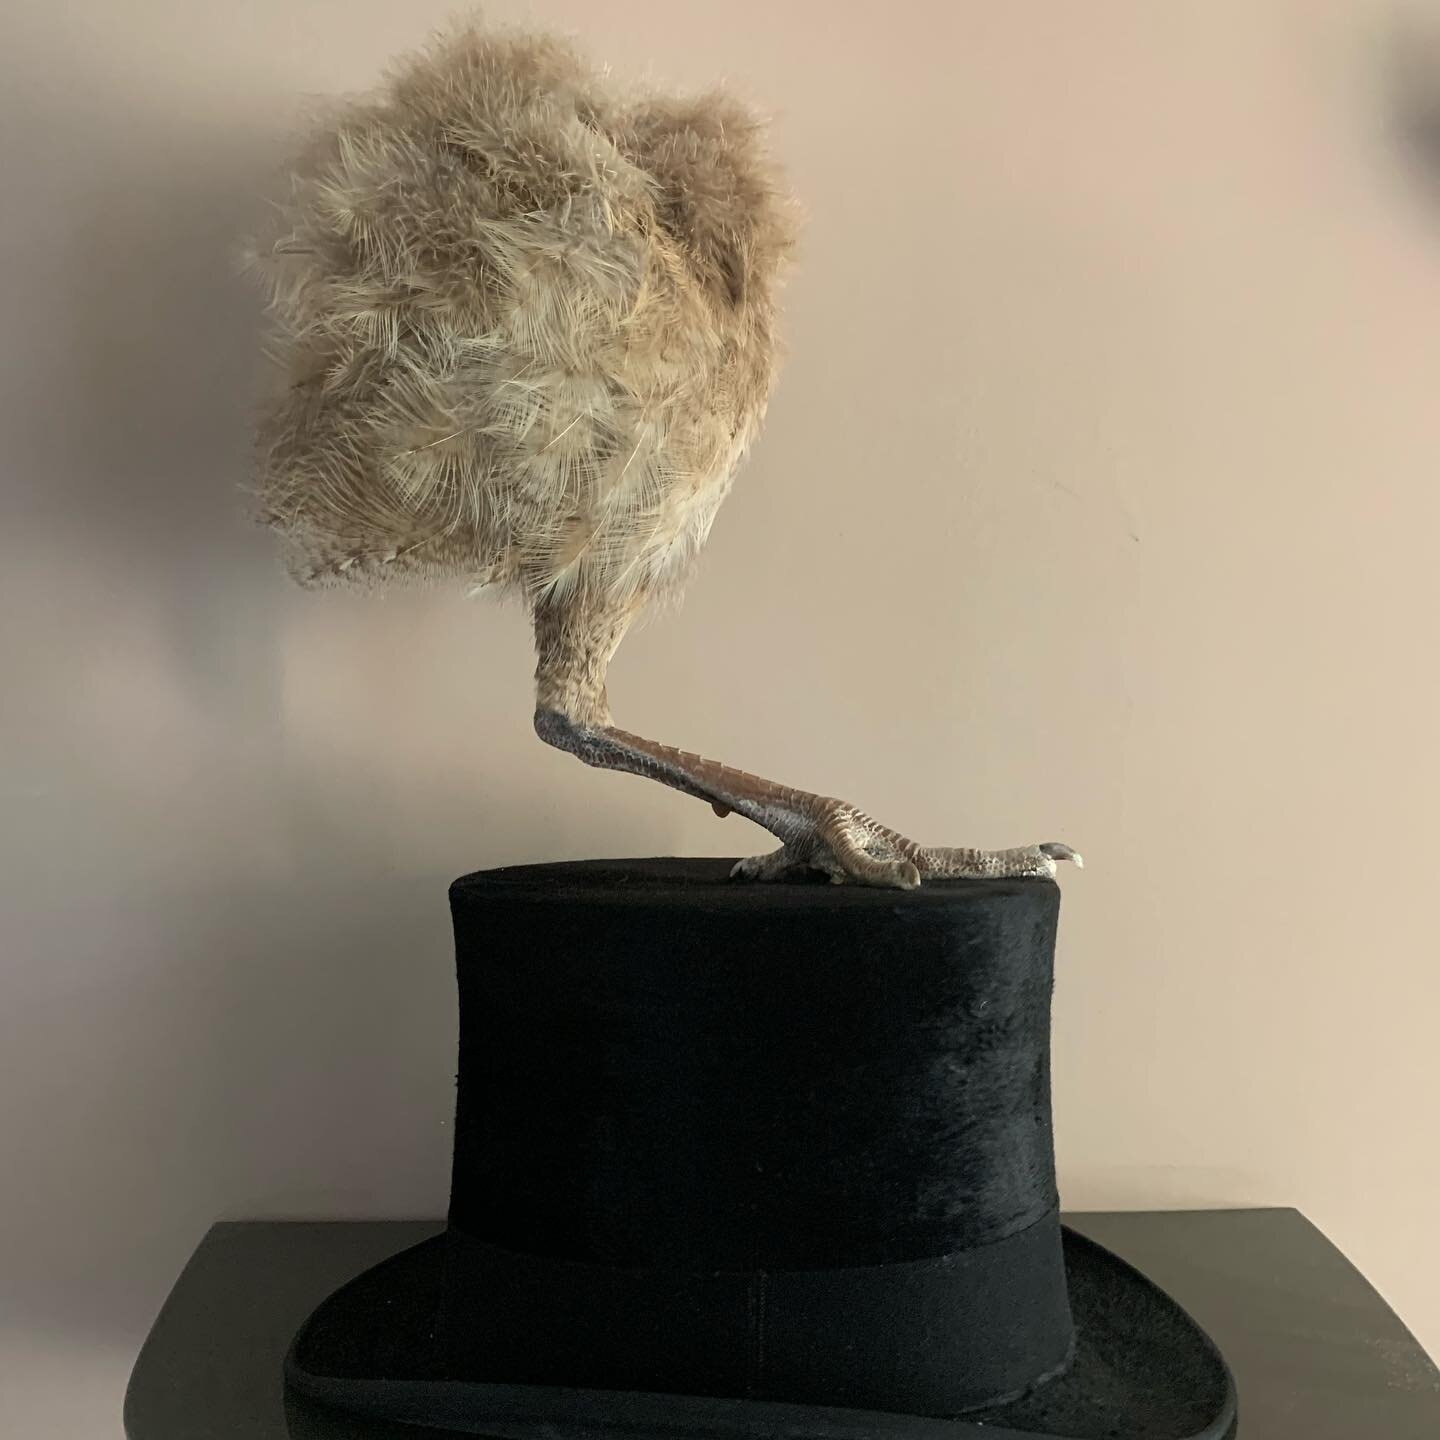 I&rsquo;m selling some stuff because of my shrunken workshop, so if you&rsquo;re interested please send me a dm. 

#taxidermy #taxidermist #taxidermyart #tophat #peacock #sale #opgezettedieren